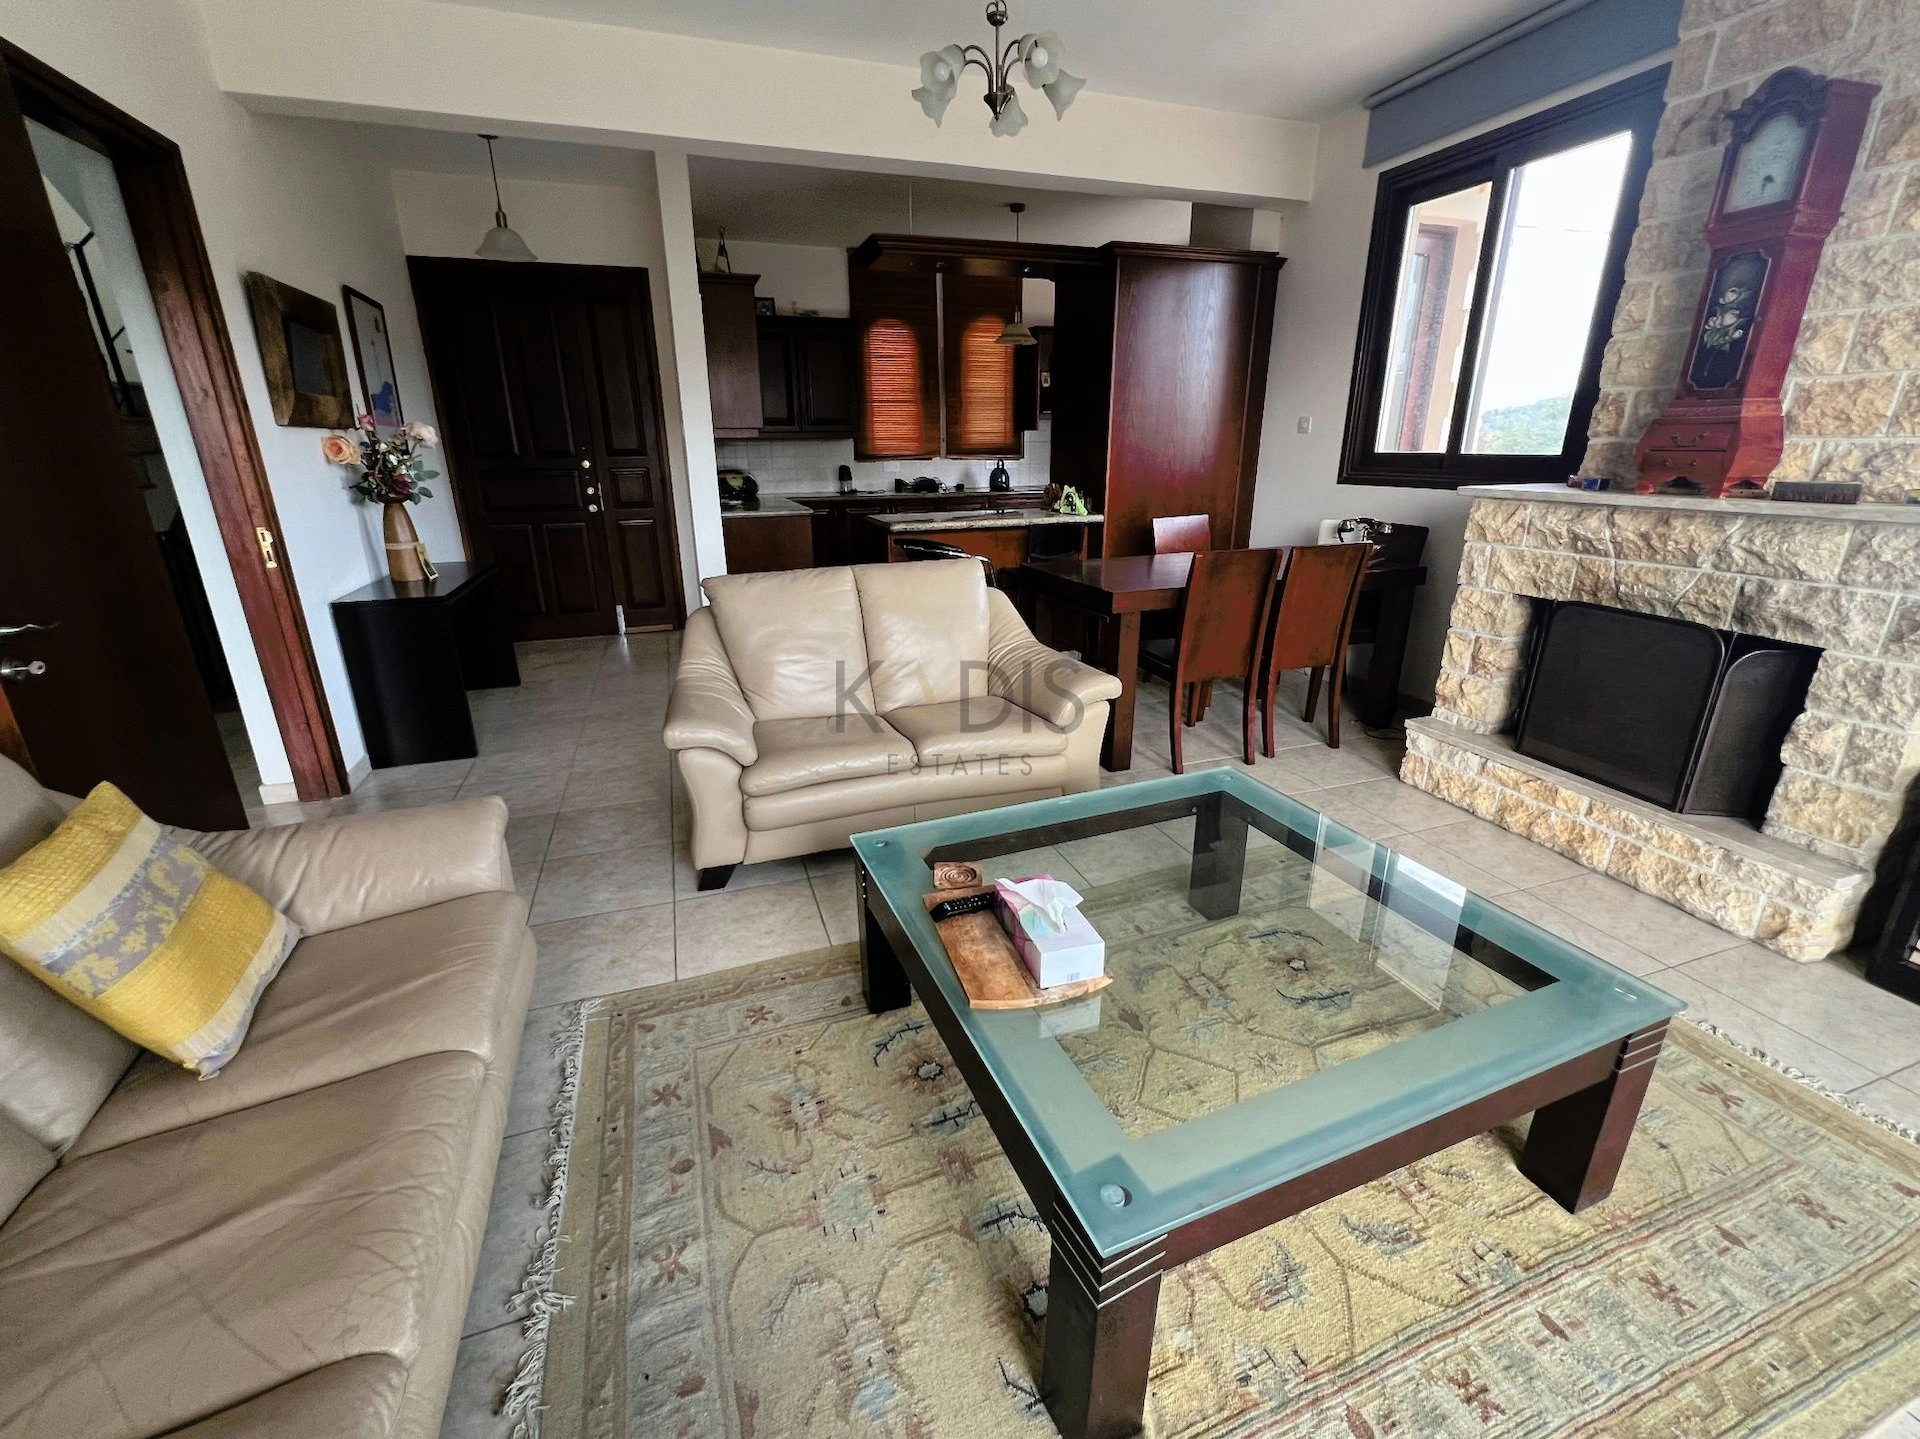 3 Bedroom House for Sale in Mosfiloti, Larnaca District